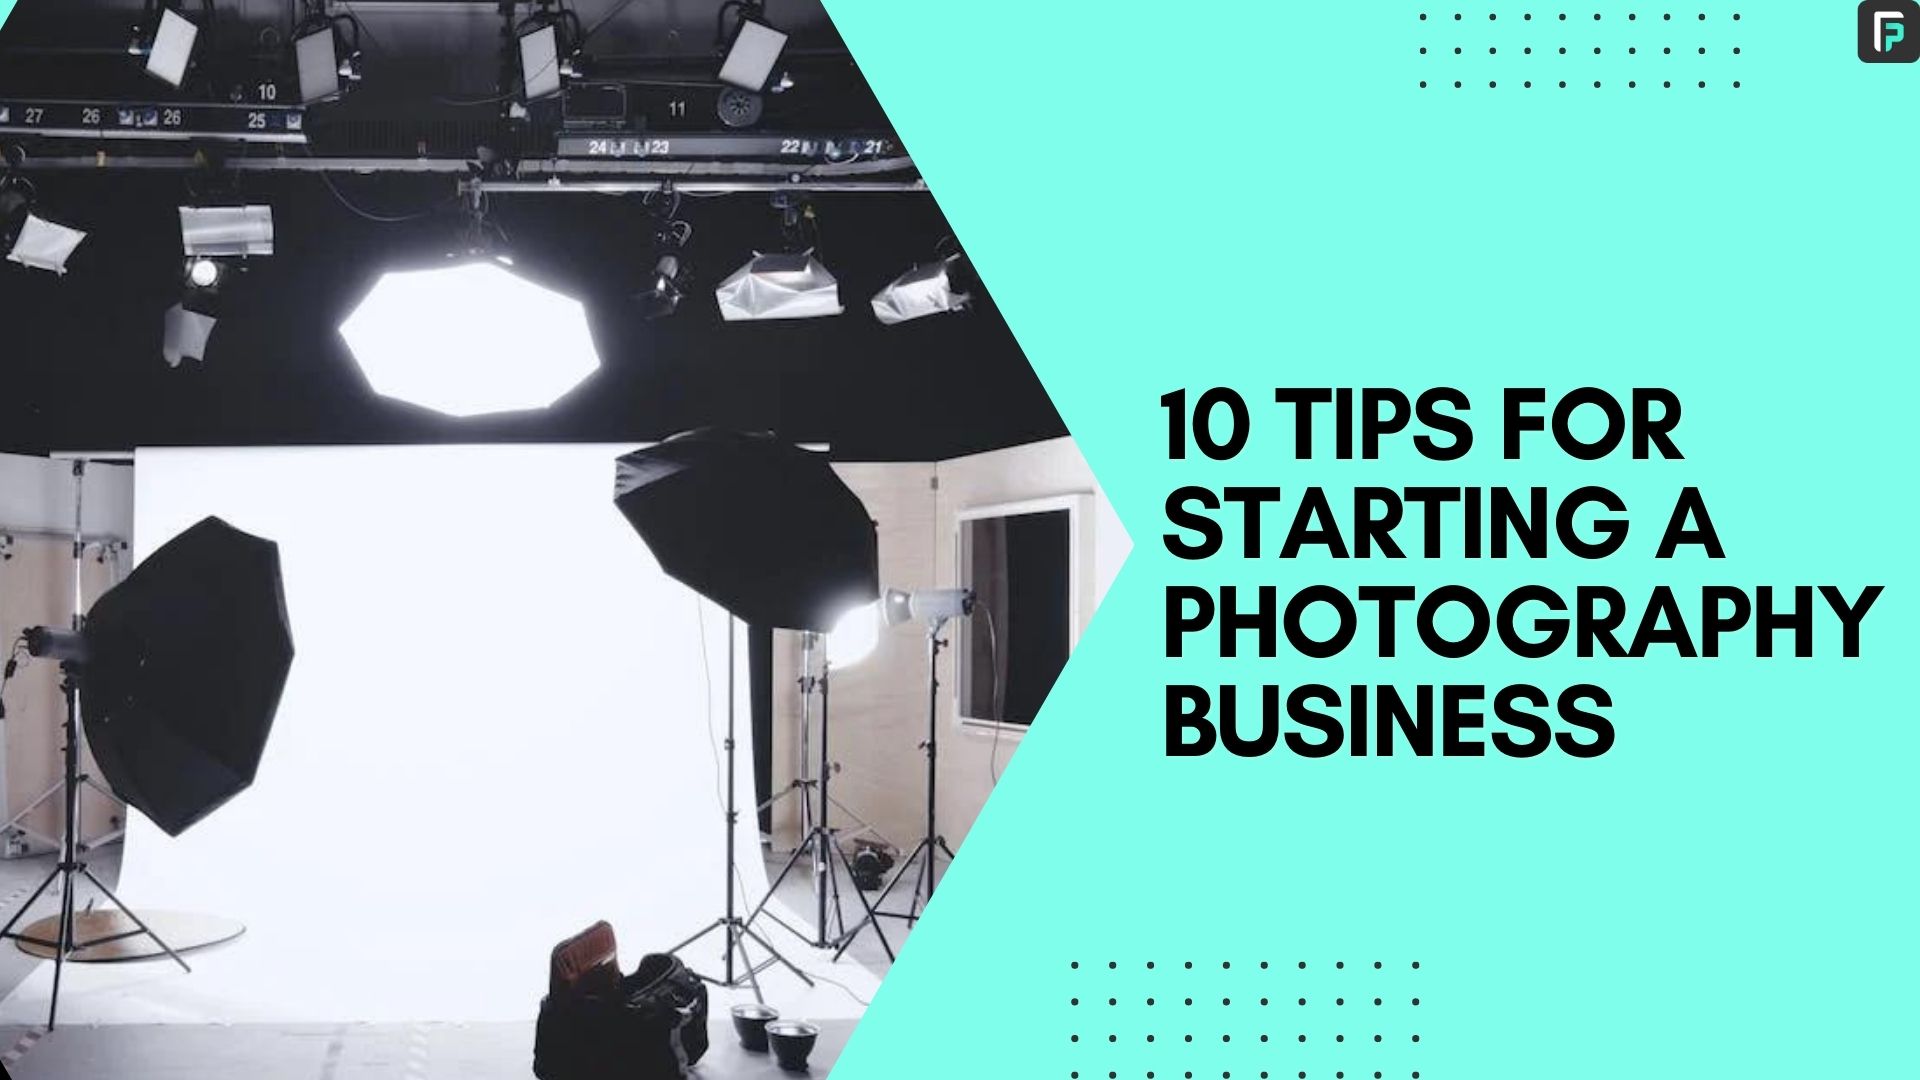 10 tips for starting a photography business